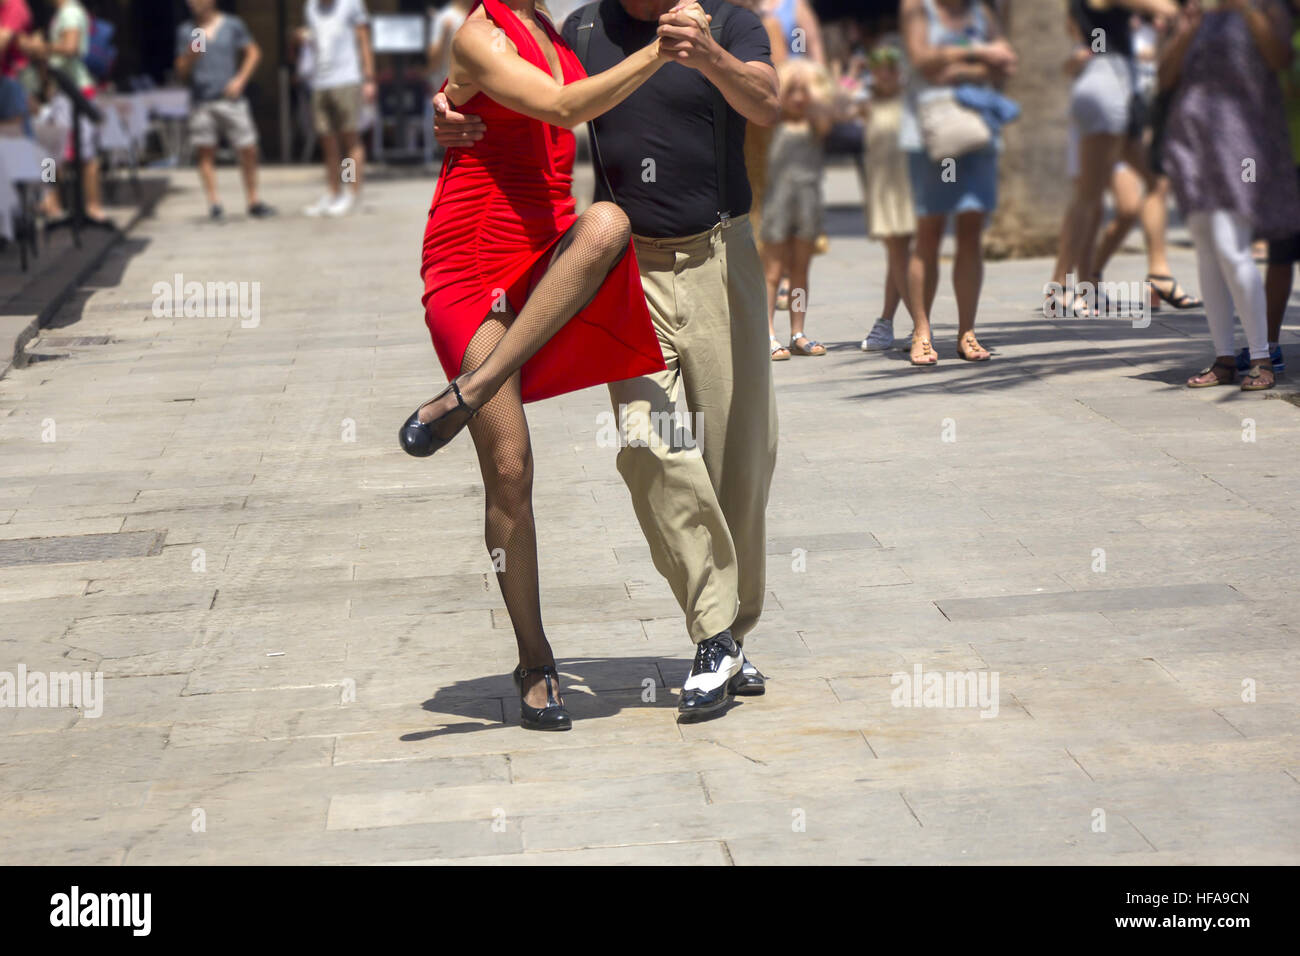 Street dancers performing tango in the street among the people Stock Photo